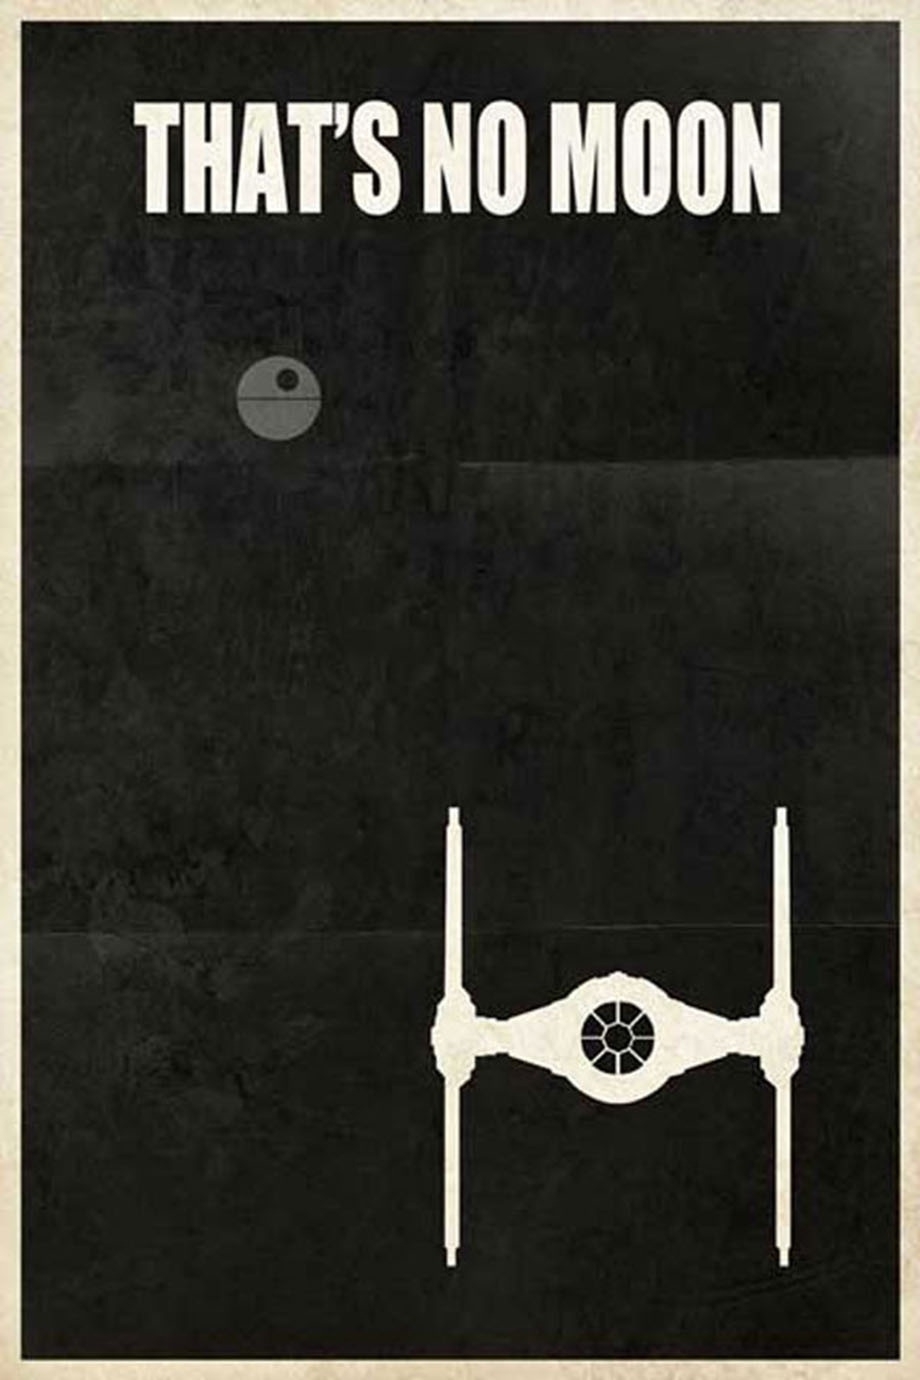 Awesome Pop Culture HD Posters. 